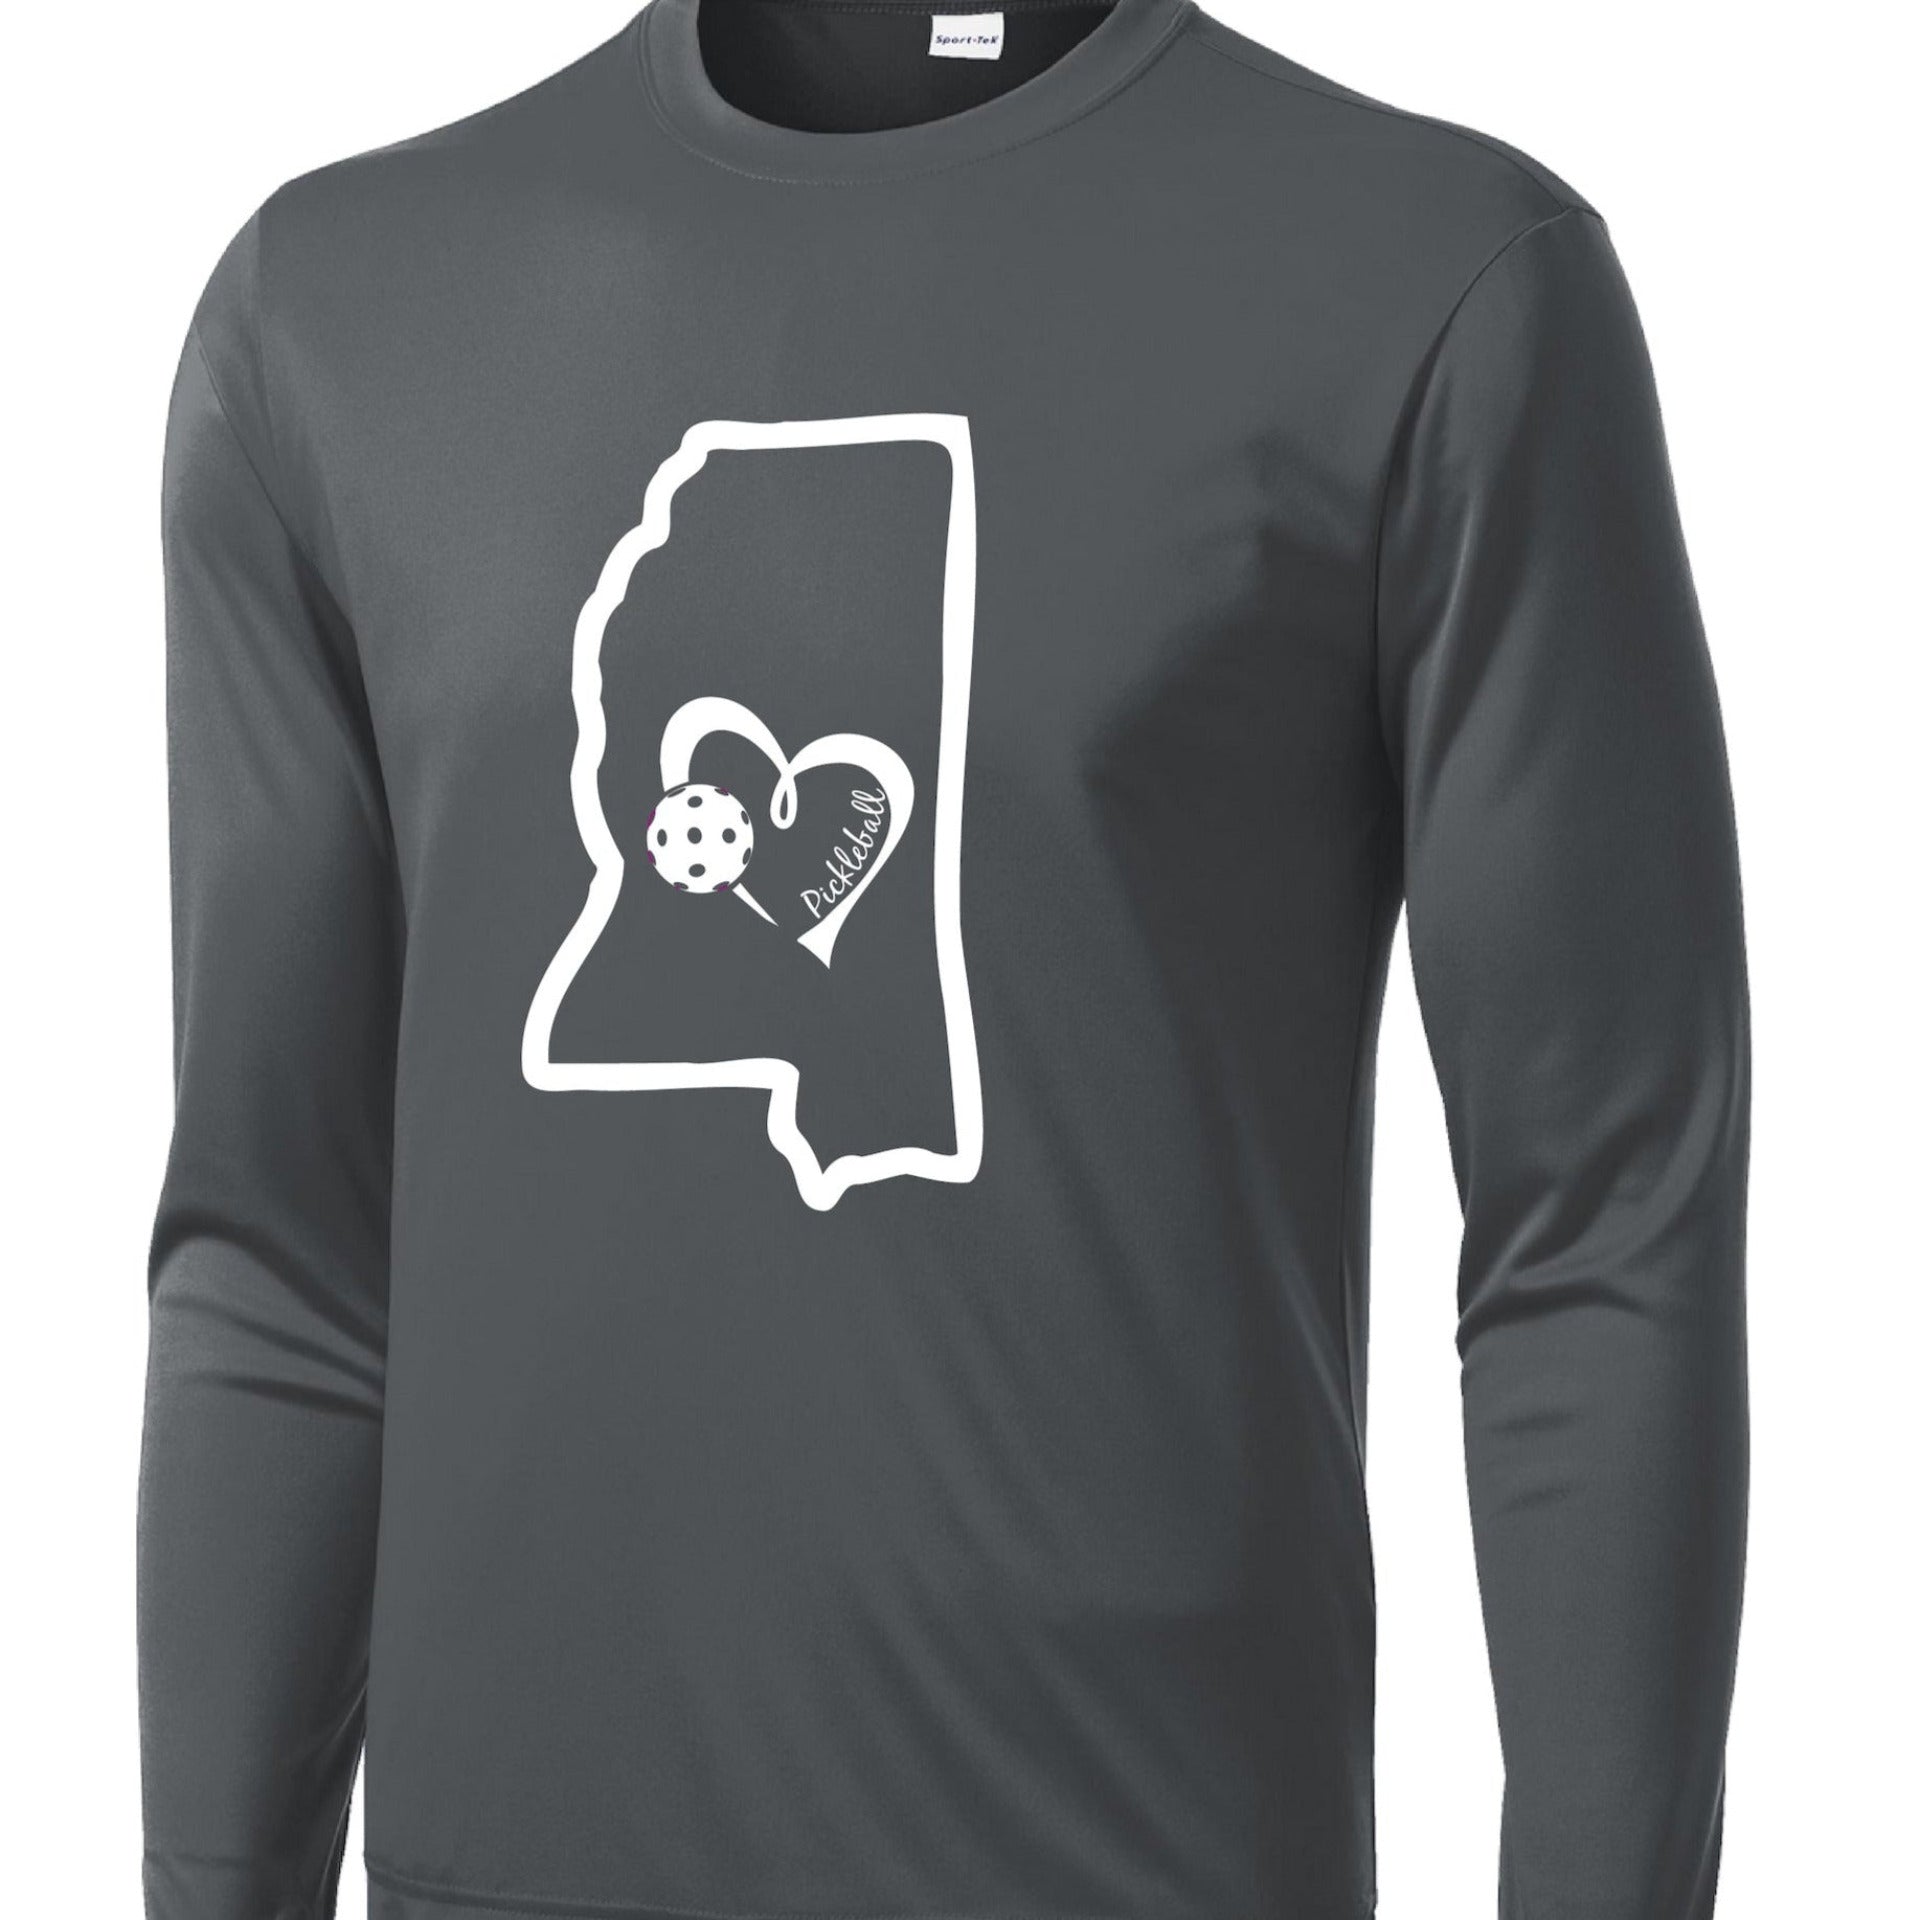 Pickleball Design: Mississippi State with Heart  Men's Styles: Long Sleeve  Shirts are lightweight, roomy and highly breathable. These moisture-wicking shirts are designed for athletic performance. They feature PosiCharge technology to lock in color and prevent logos from fading. Removable tag and set-in sleeves for comfort.